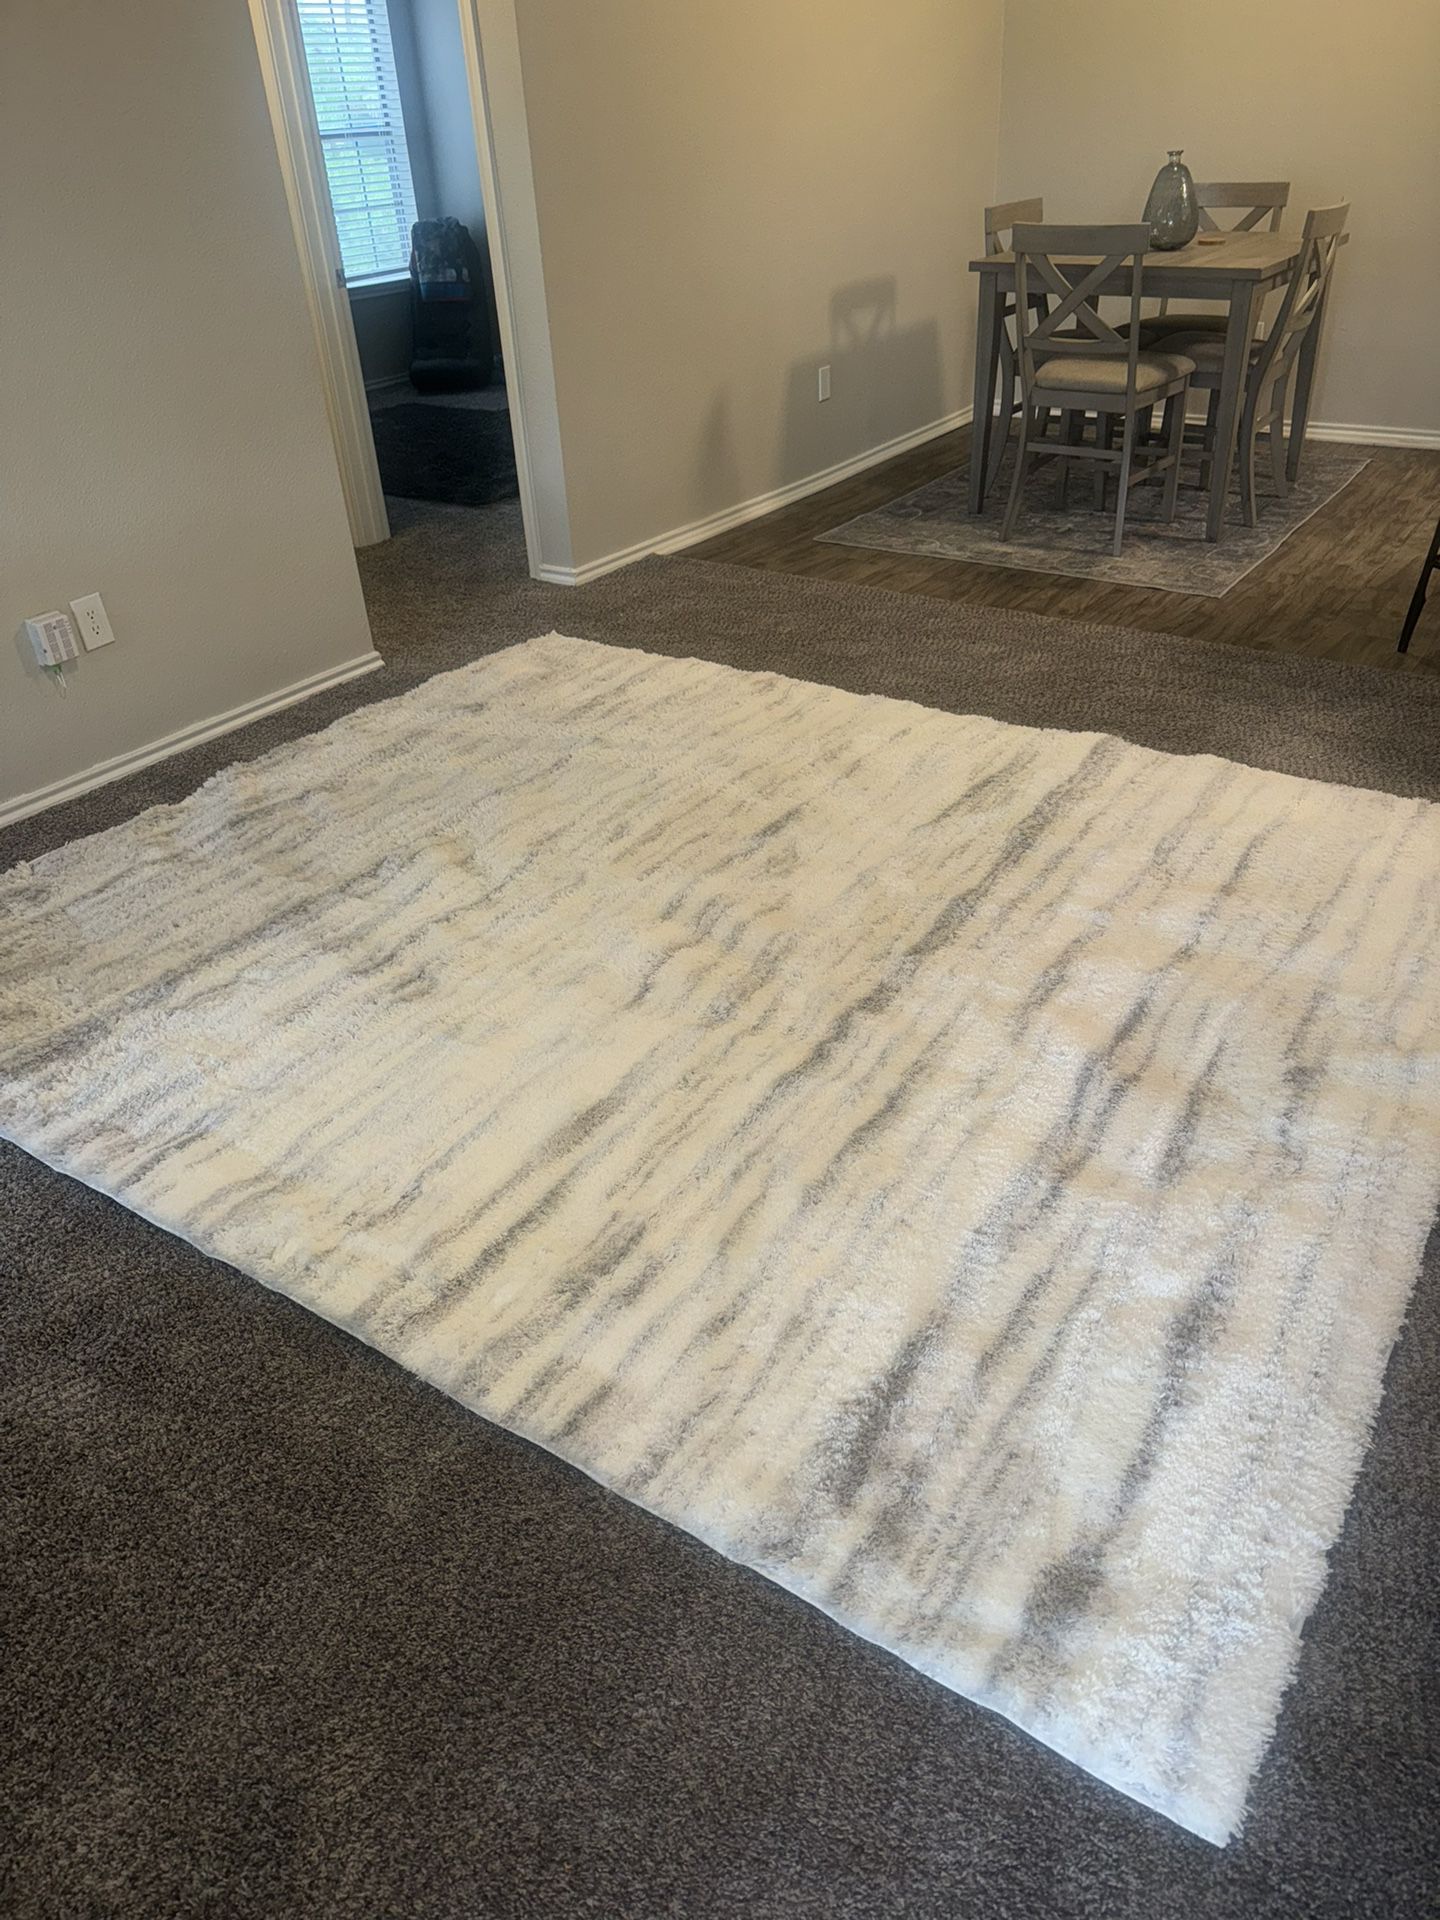 Large Area Rug 7 X 9